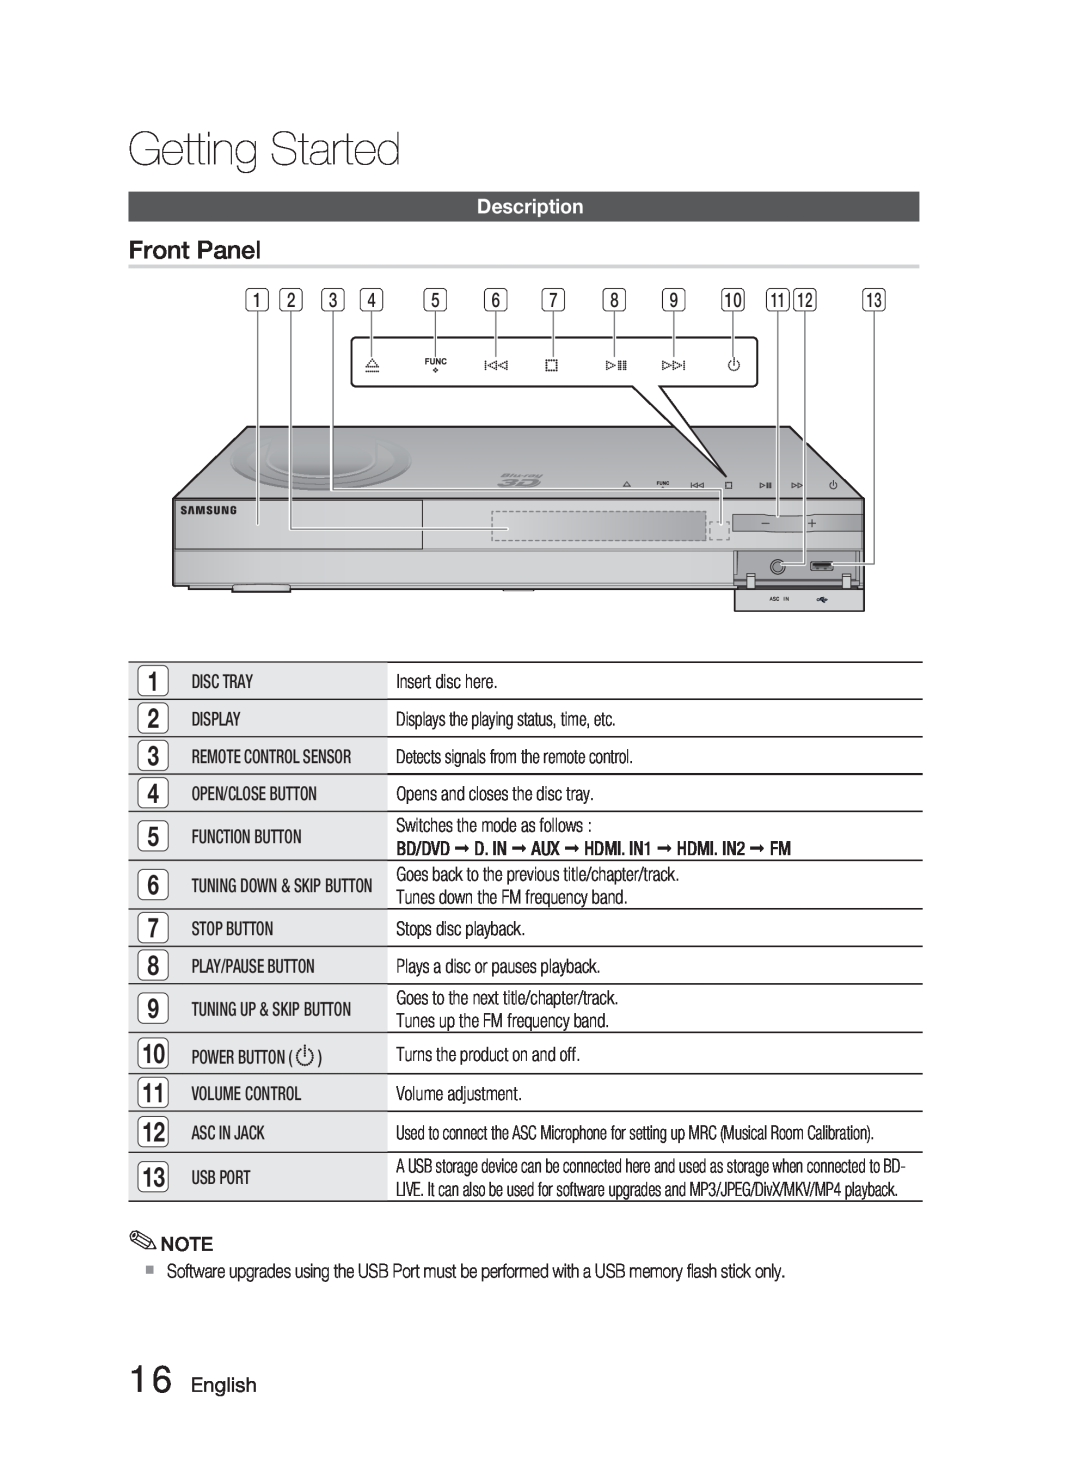 Samsung AH68-02279Y user manual Front Panel, Description, English, Getting Started 